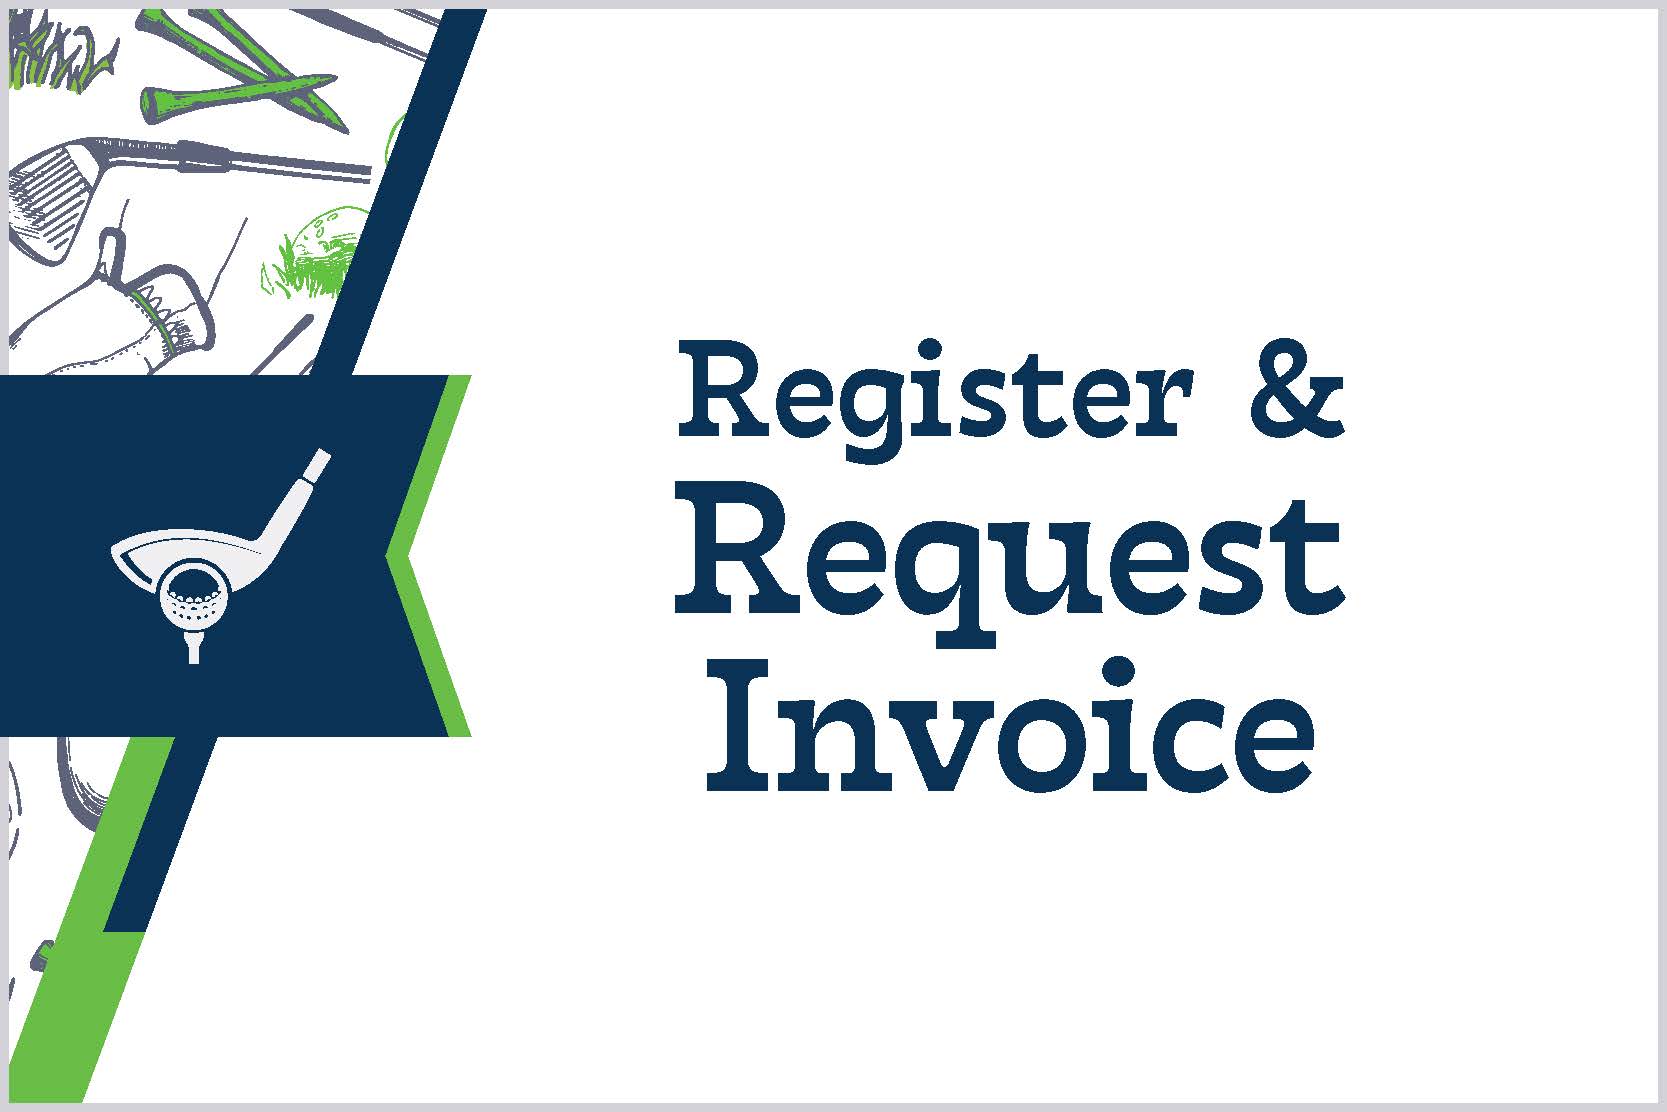 click here to register and request invoice